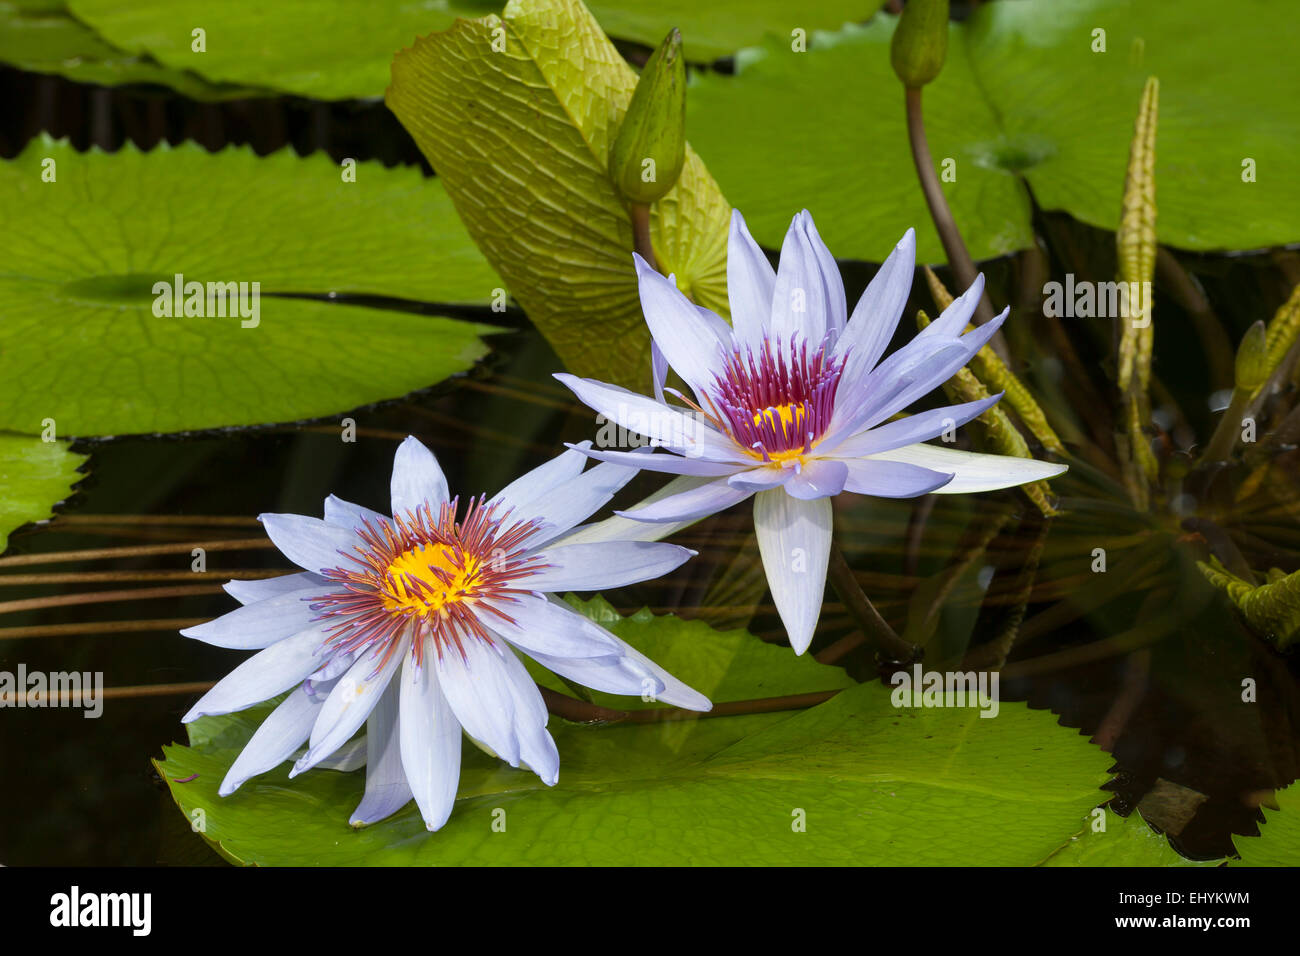 Flowers, blossom, blossom, blossoms, flourishes, botanical, Germany, garden, Hydrophyt, nature, nobody, Nymphaeaceae, Nymphaea, p Stock Photo